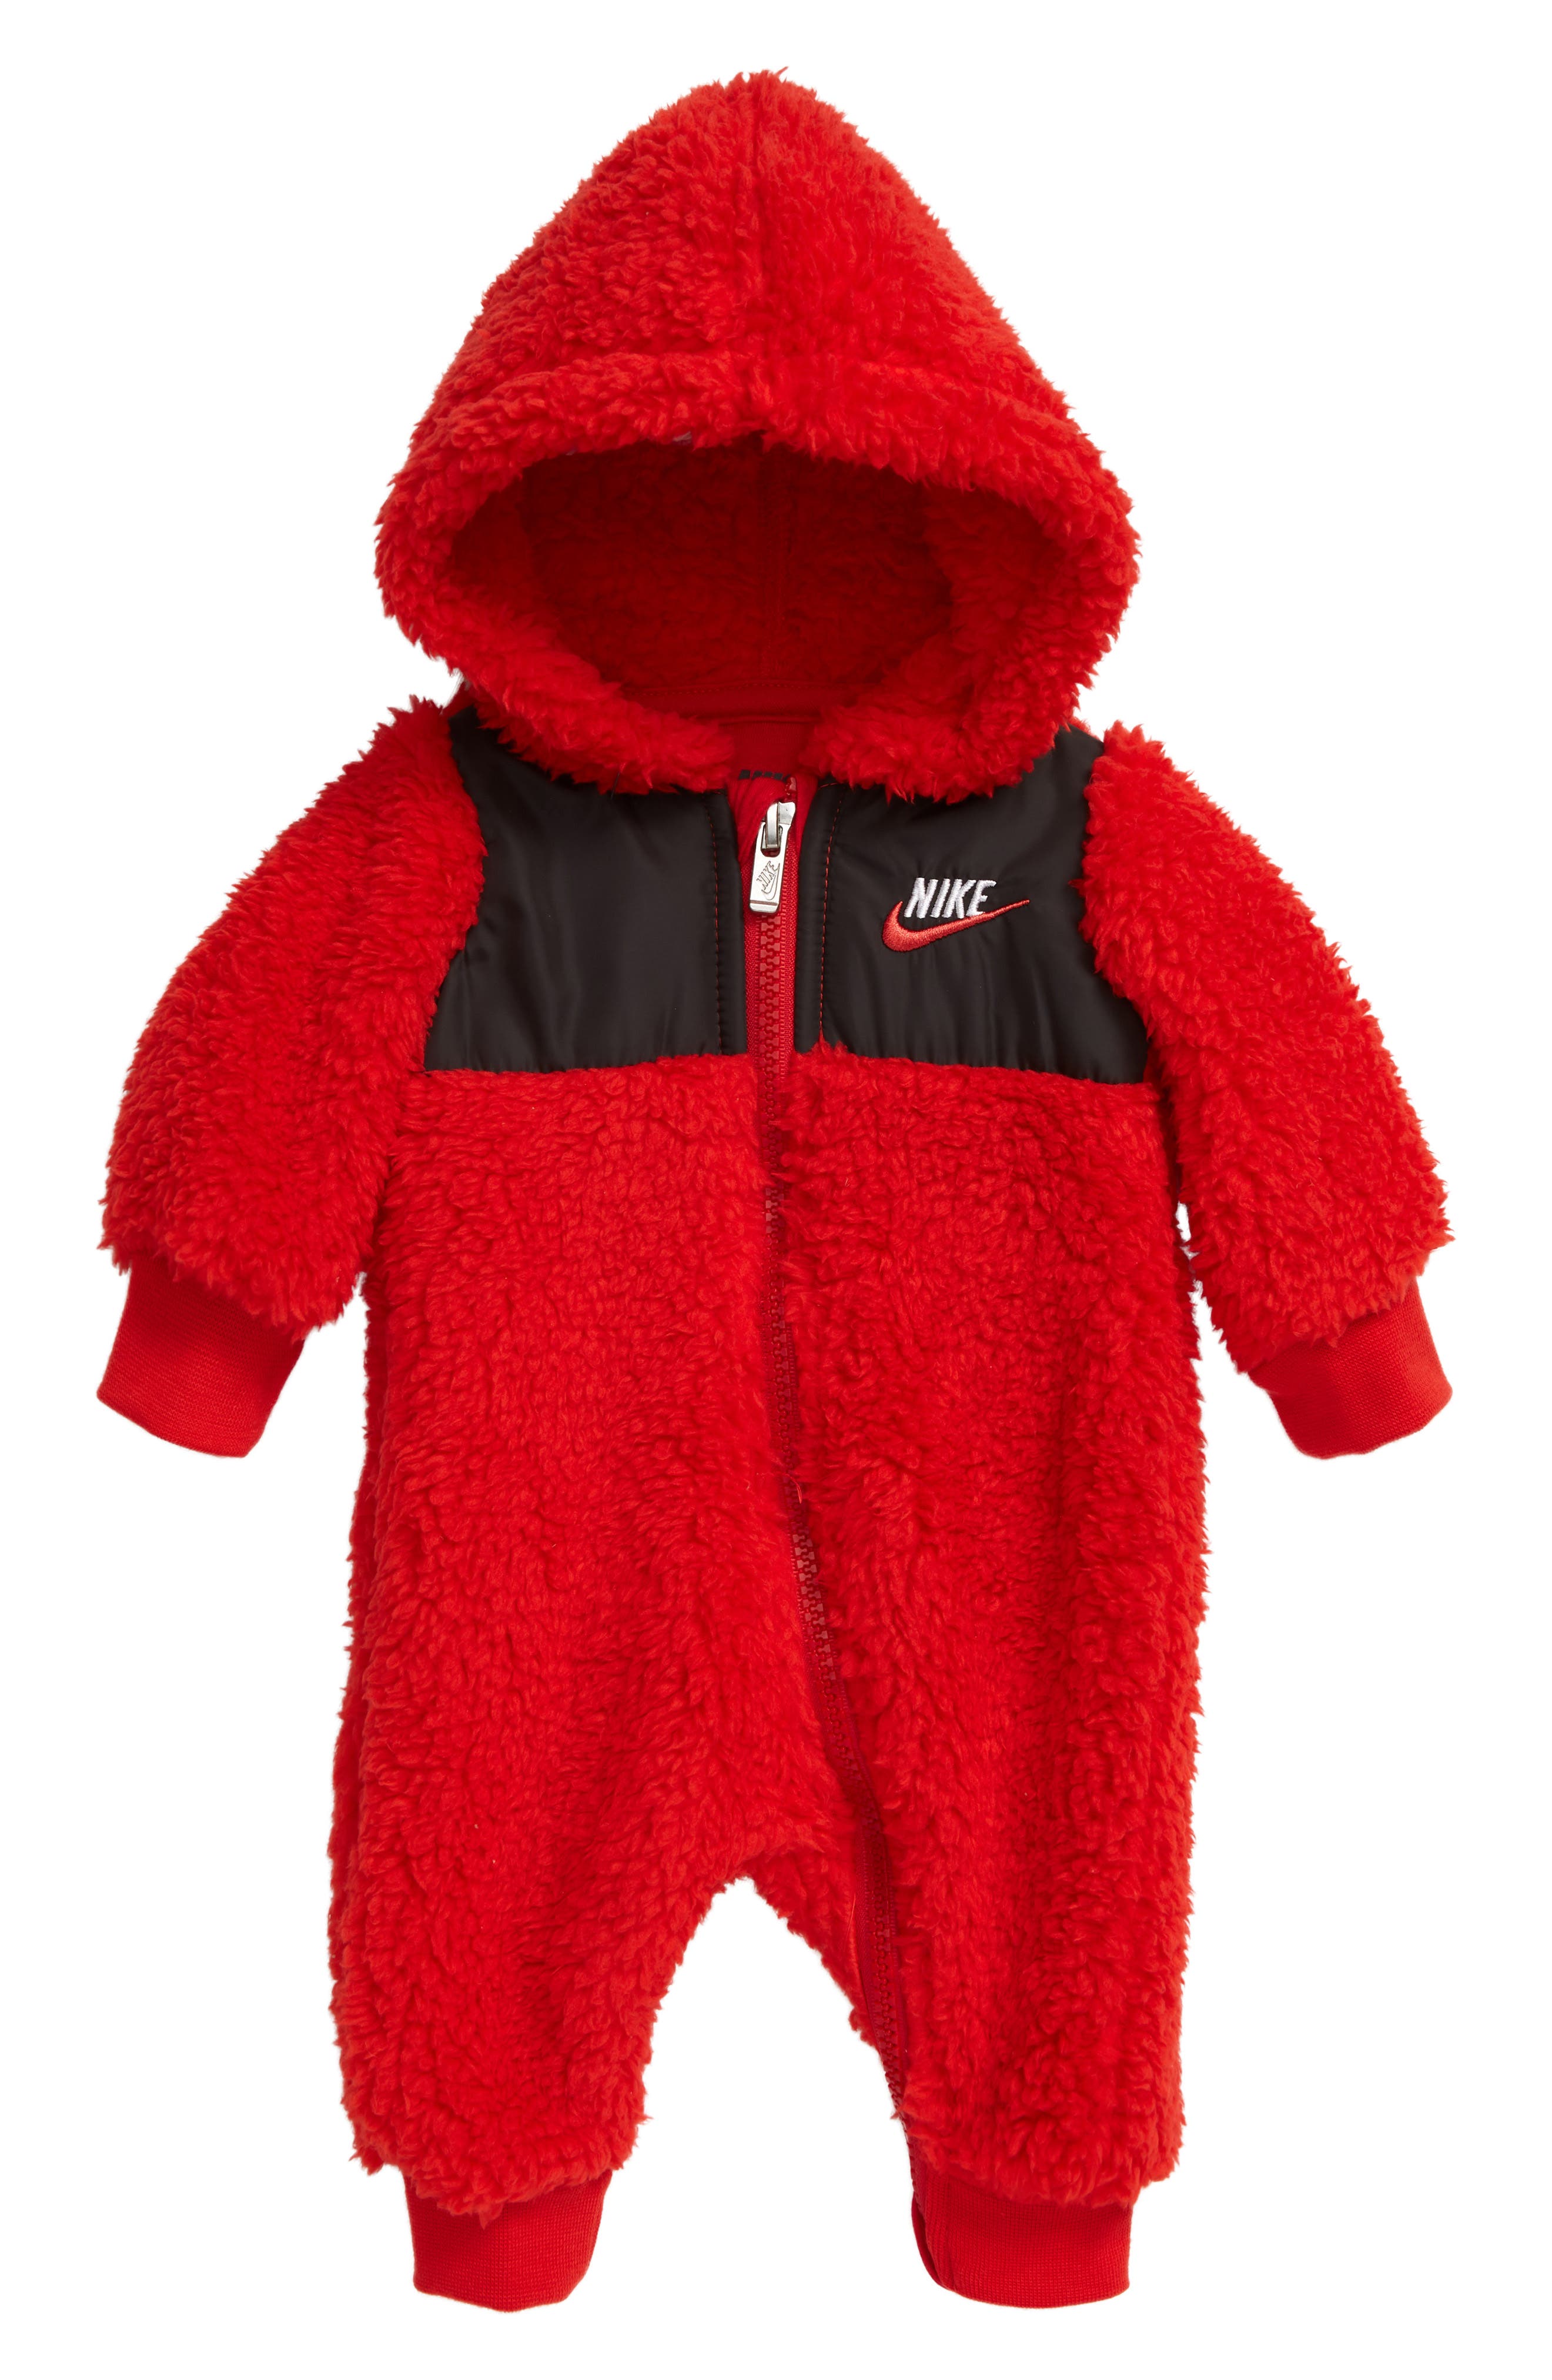 nike outfits for infants